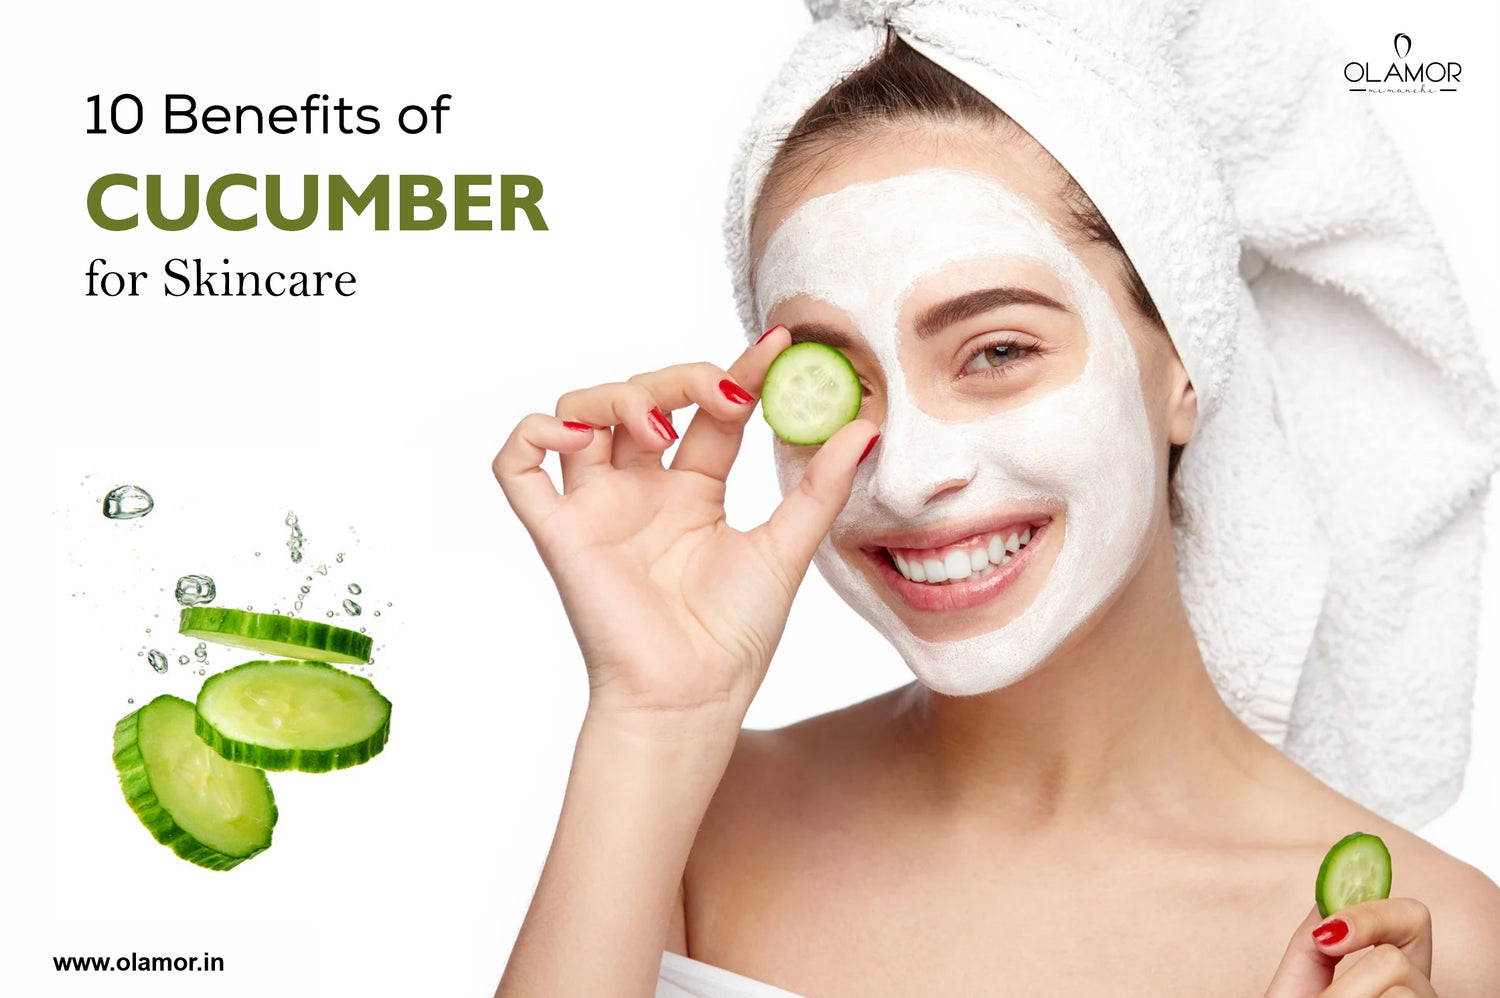 10 Benefits of Cucumber for skincare